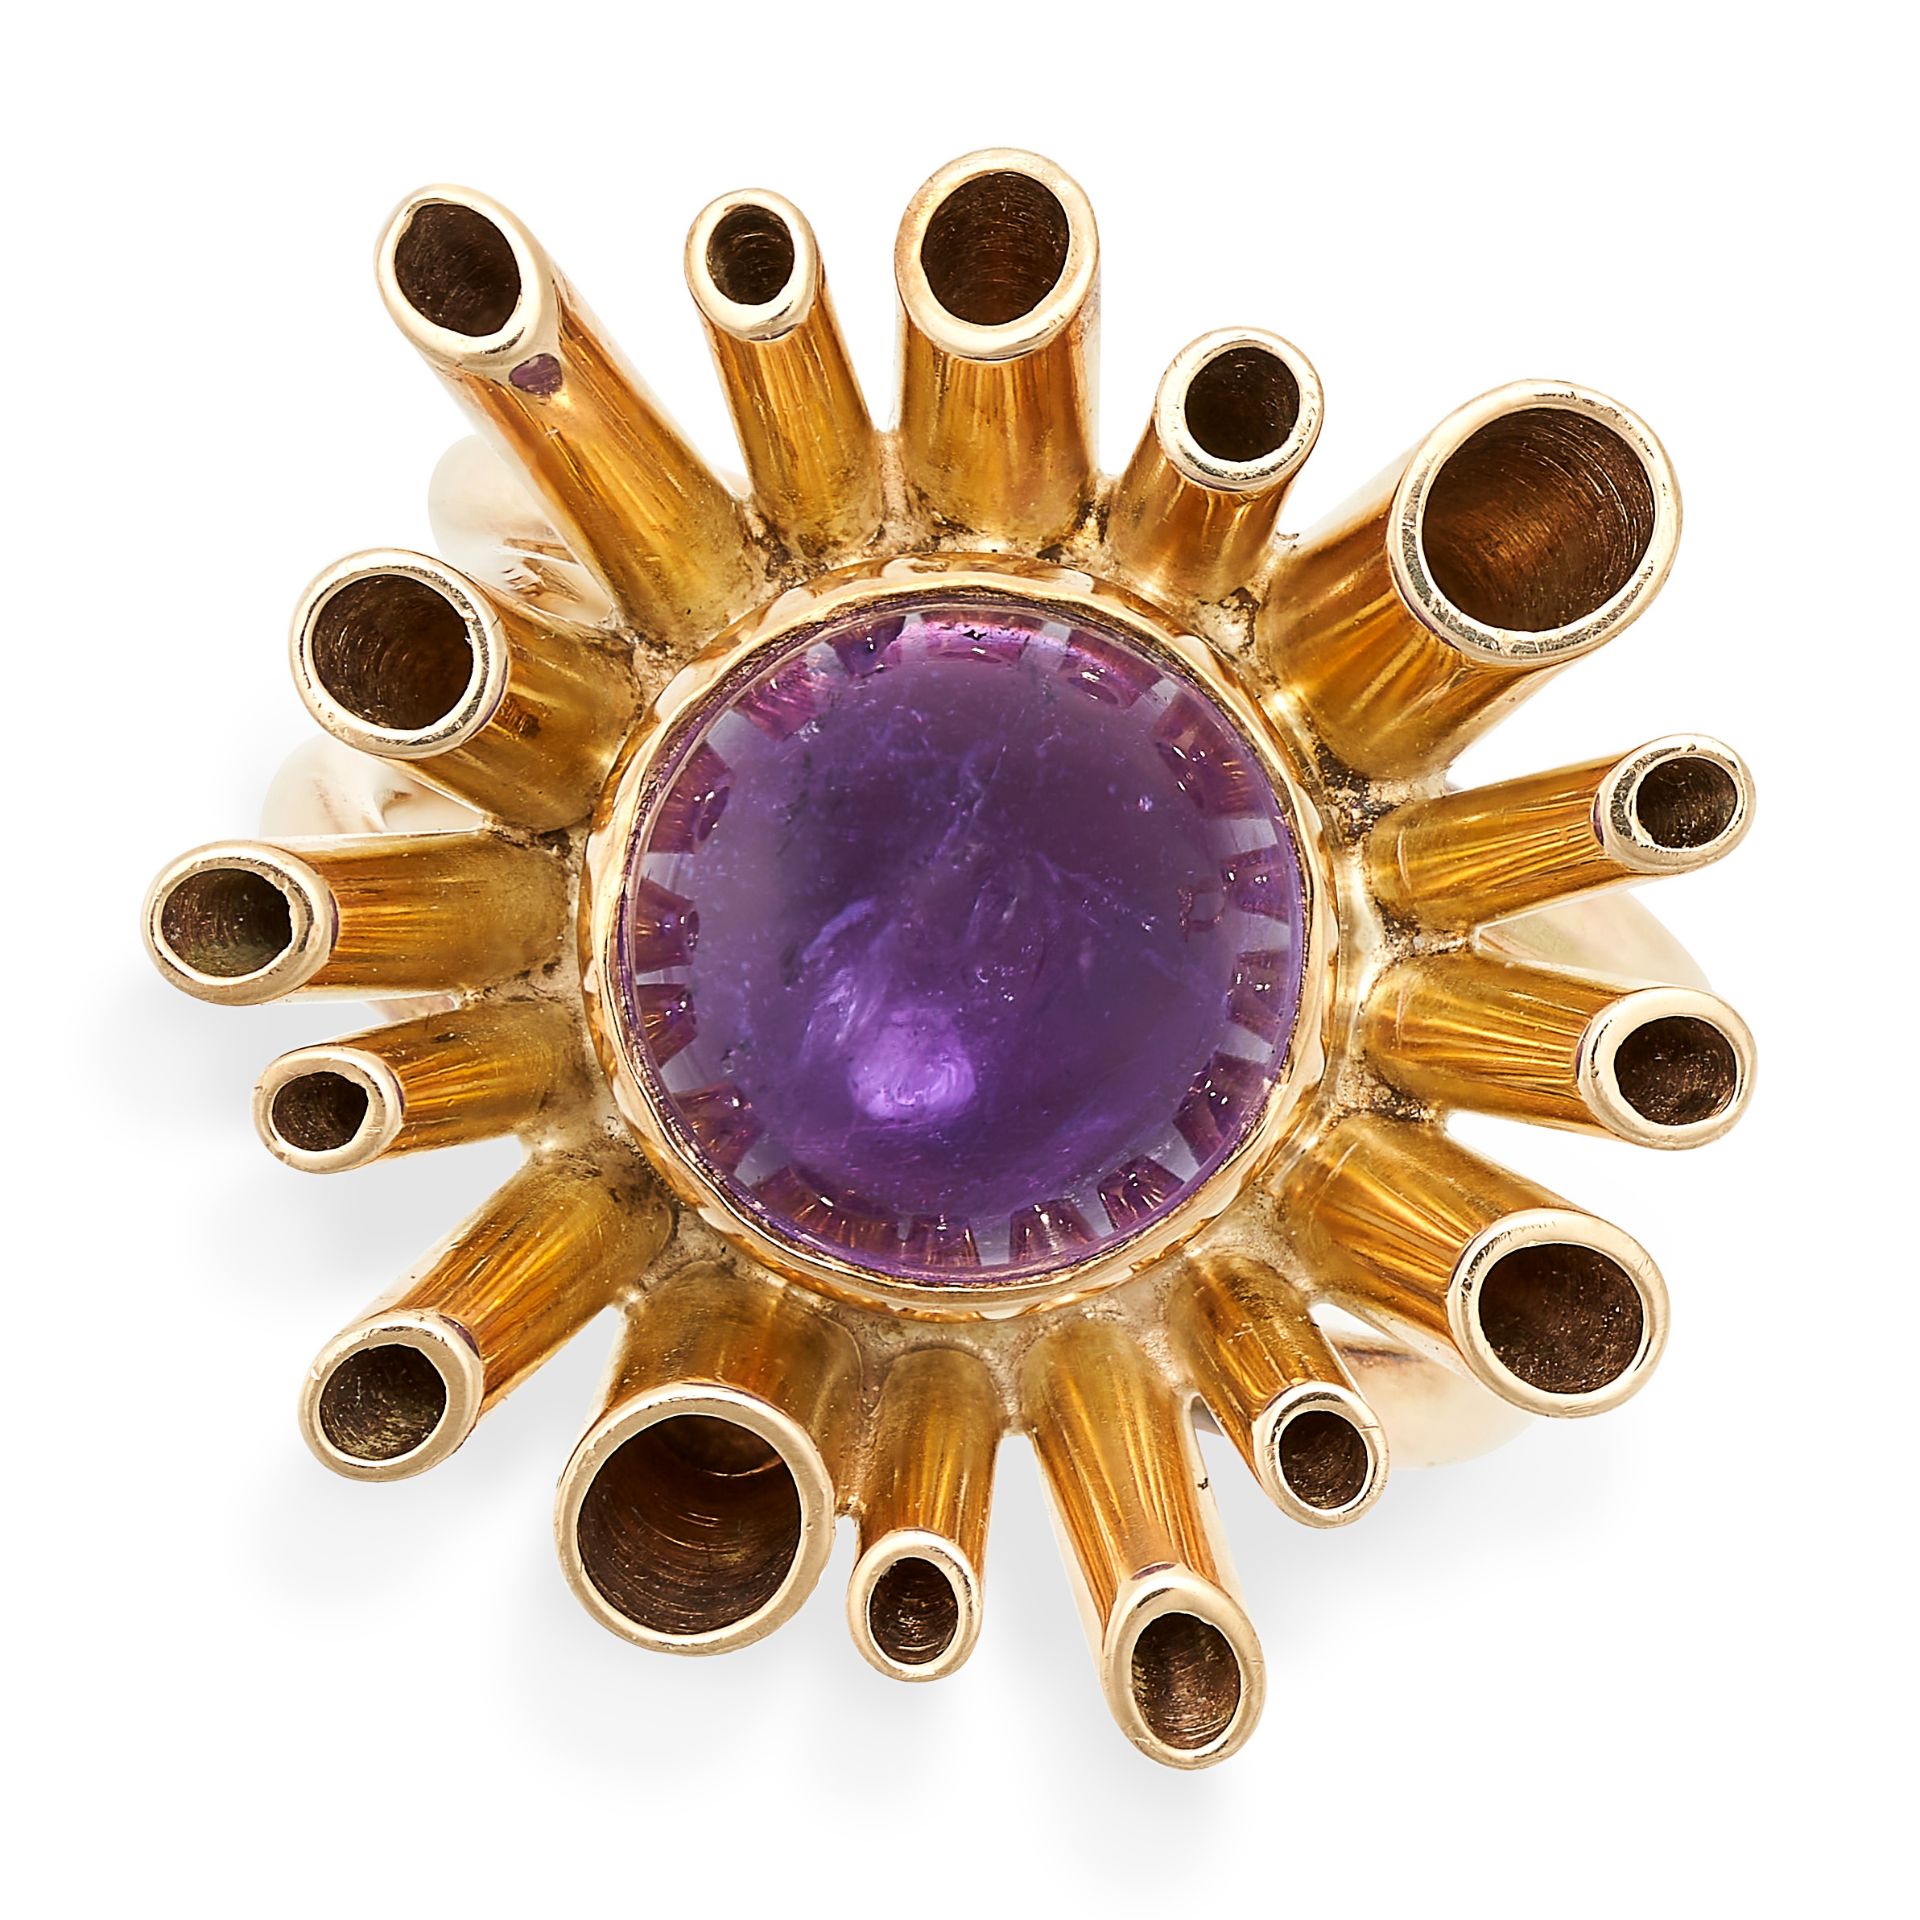 A VINTAGE AMETHYST RING in 9ct yellow gold, set with a cabochon amethyst within an abstract